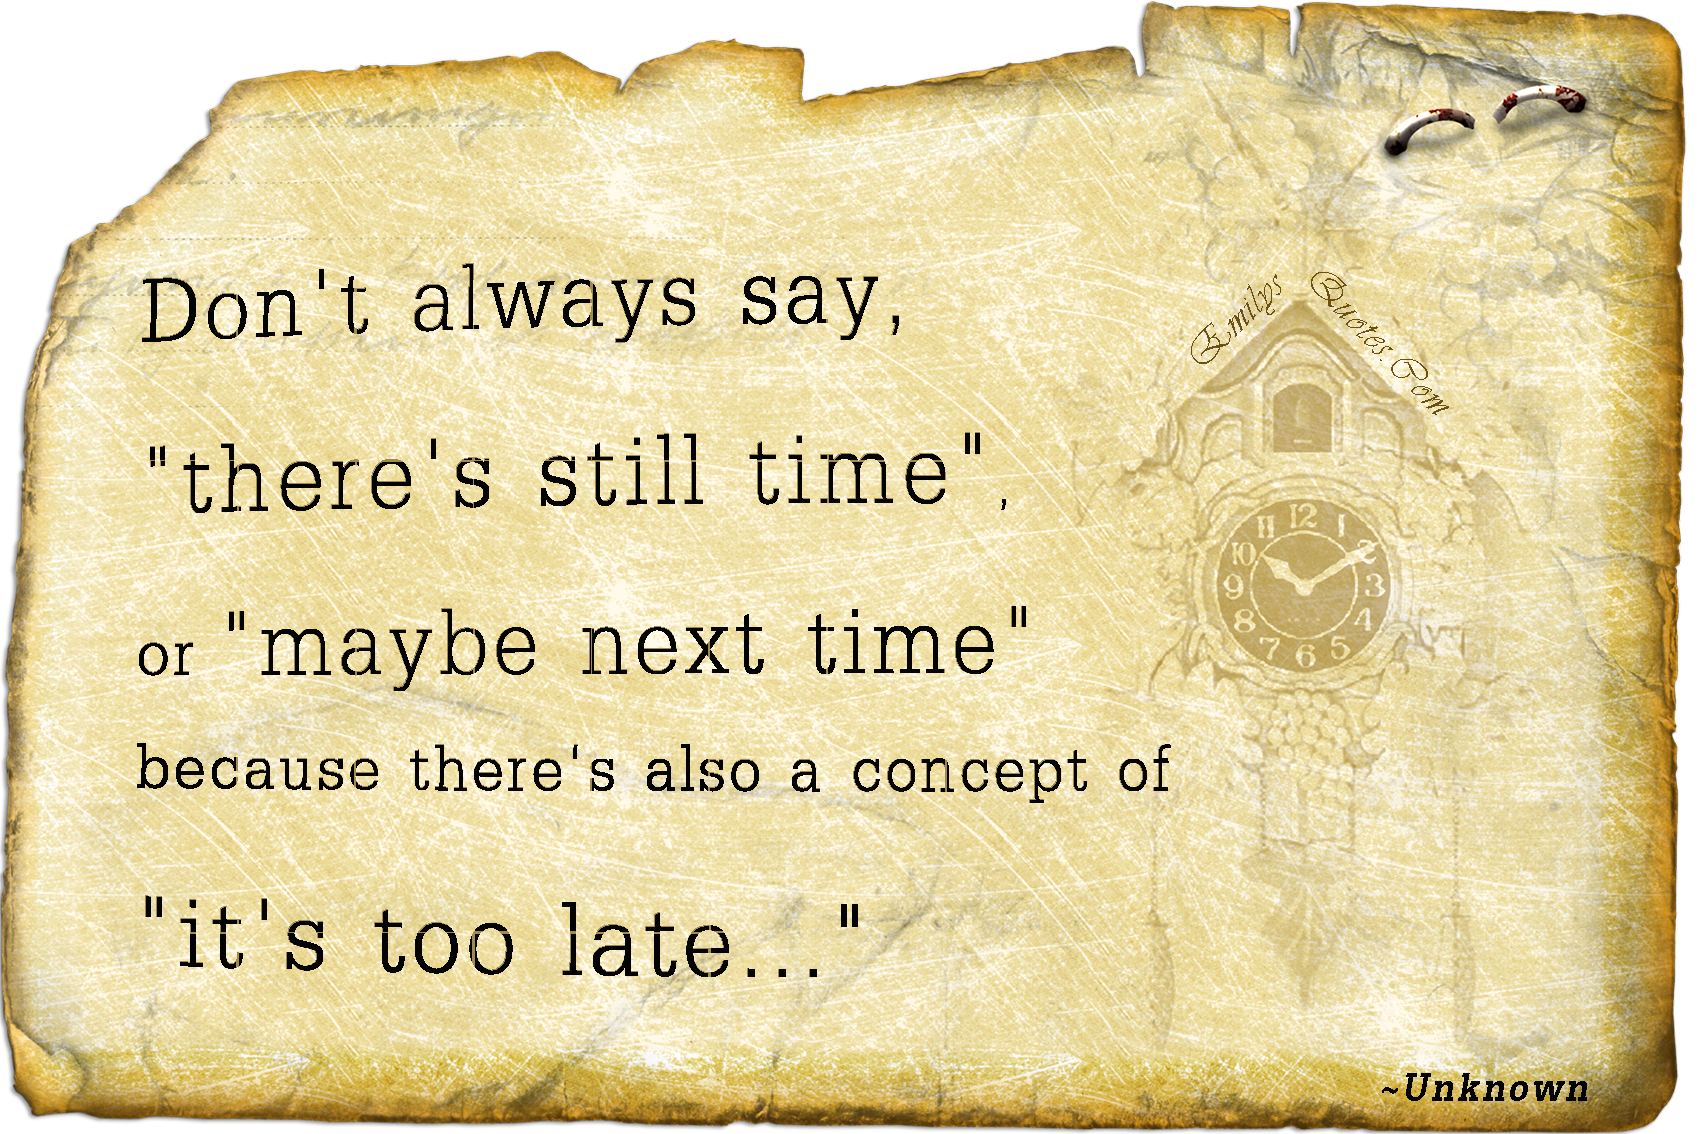 Don’t always say, “there’s still time”, or “maybe next time” because there’s also a concept of “it’s too late…”